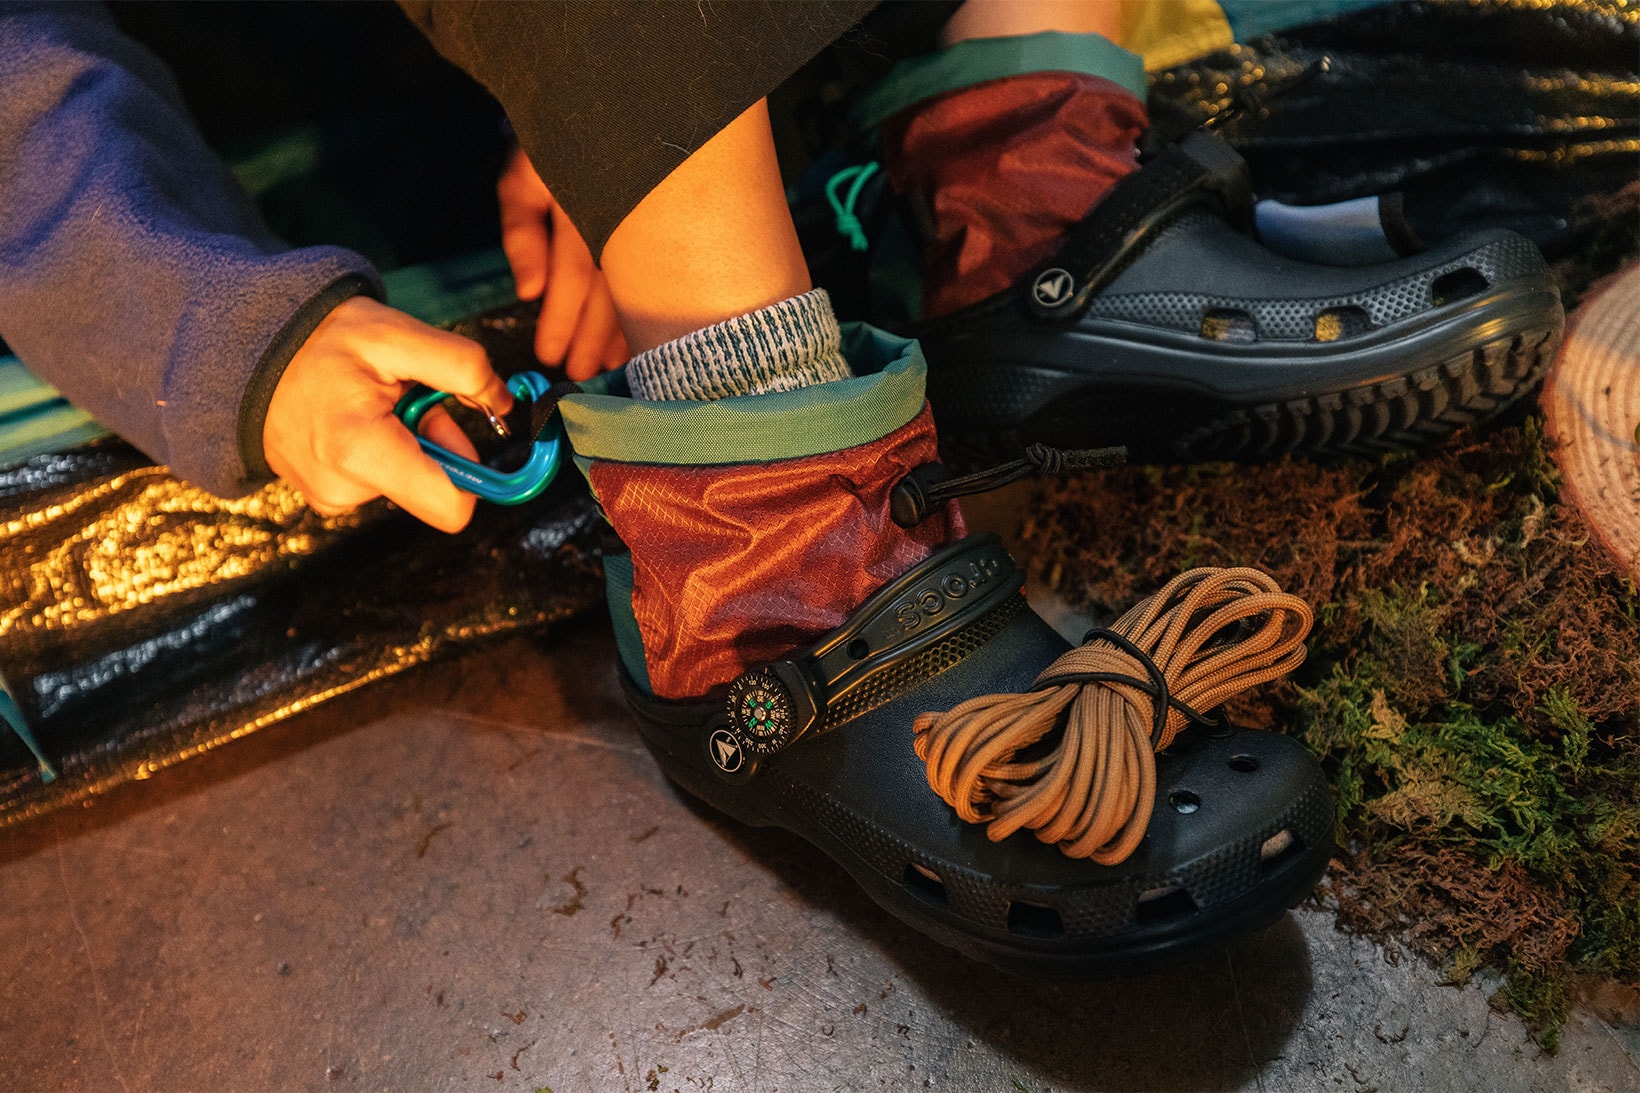 nicole mclaughlin crocs camping clogs collaboration ropes lamps upcycling sustainability